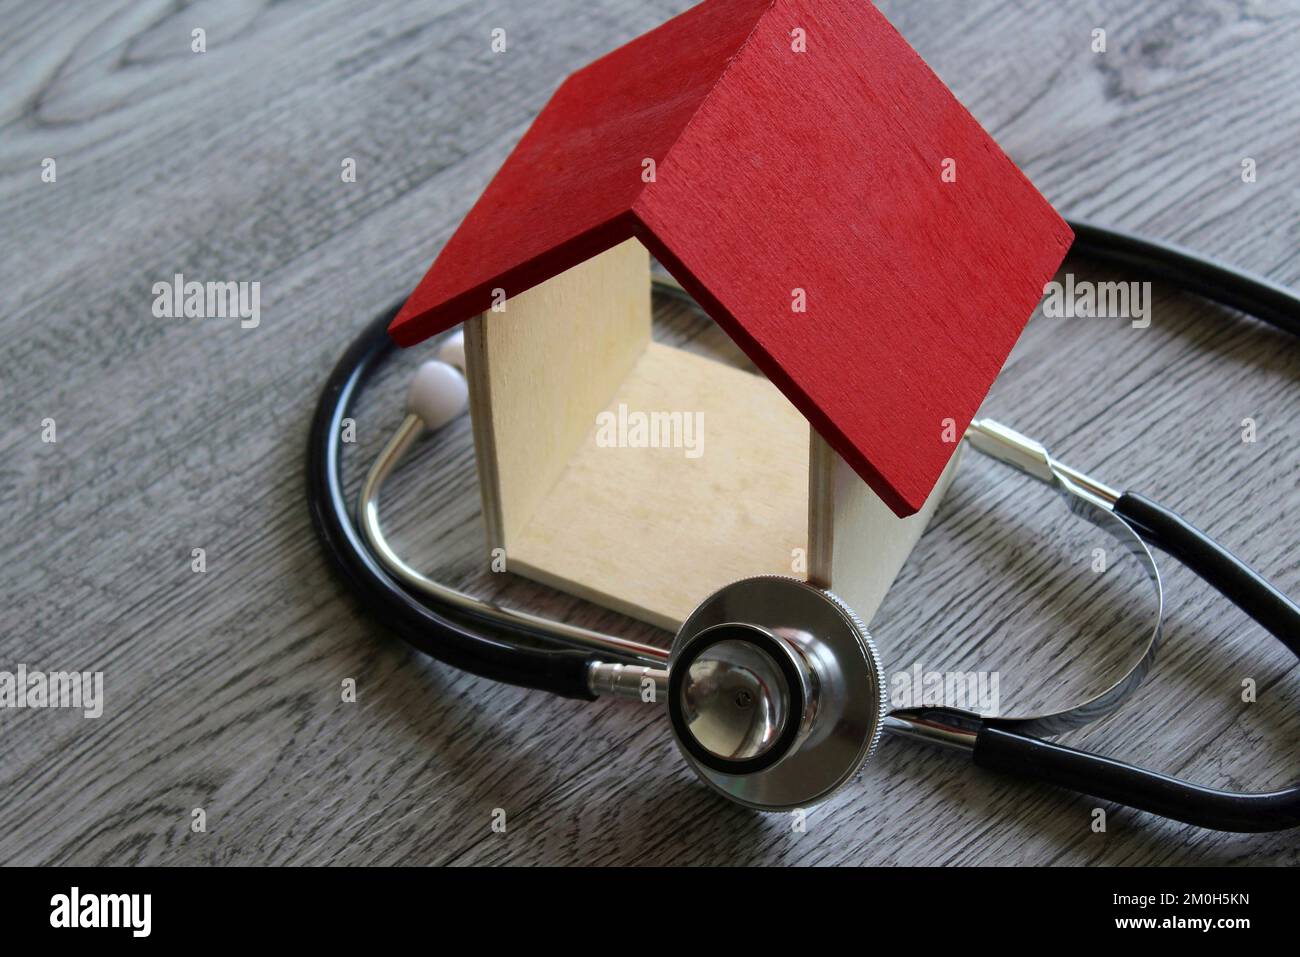 Stethoscope and house on wooden table. House inspection, repairing and diagnostic concept Stock Photo